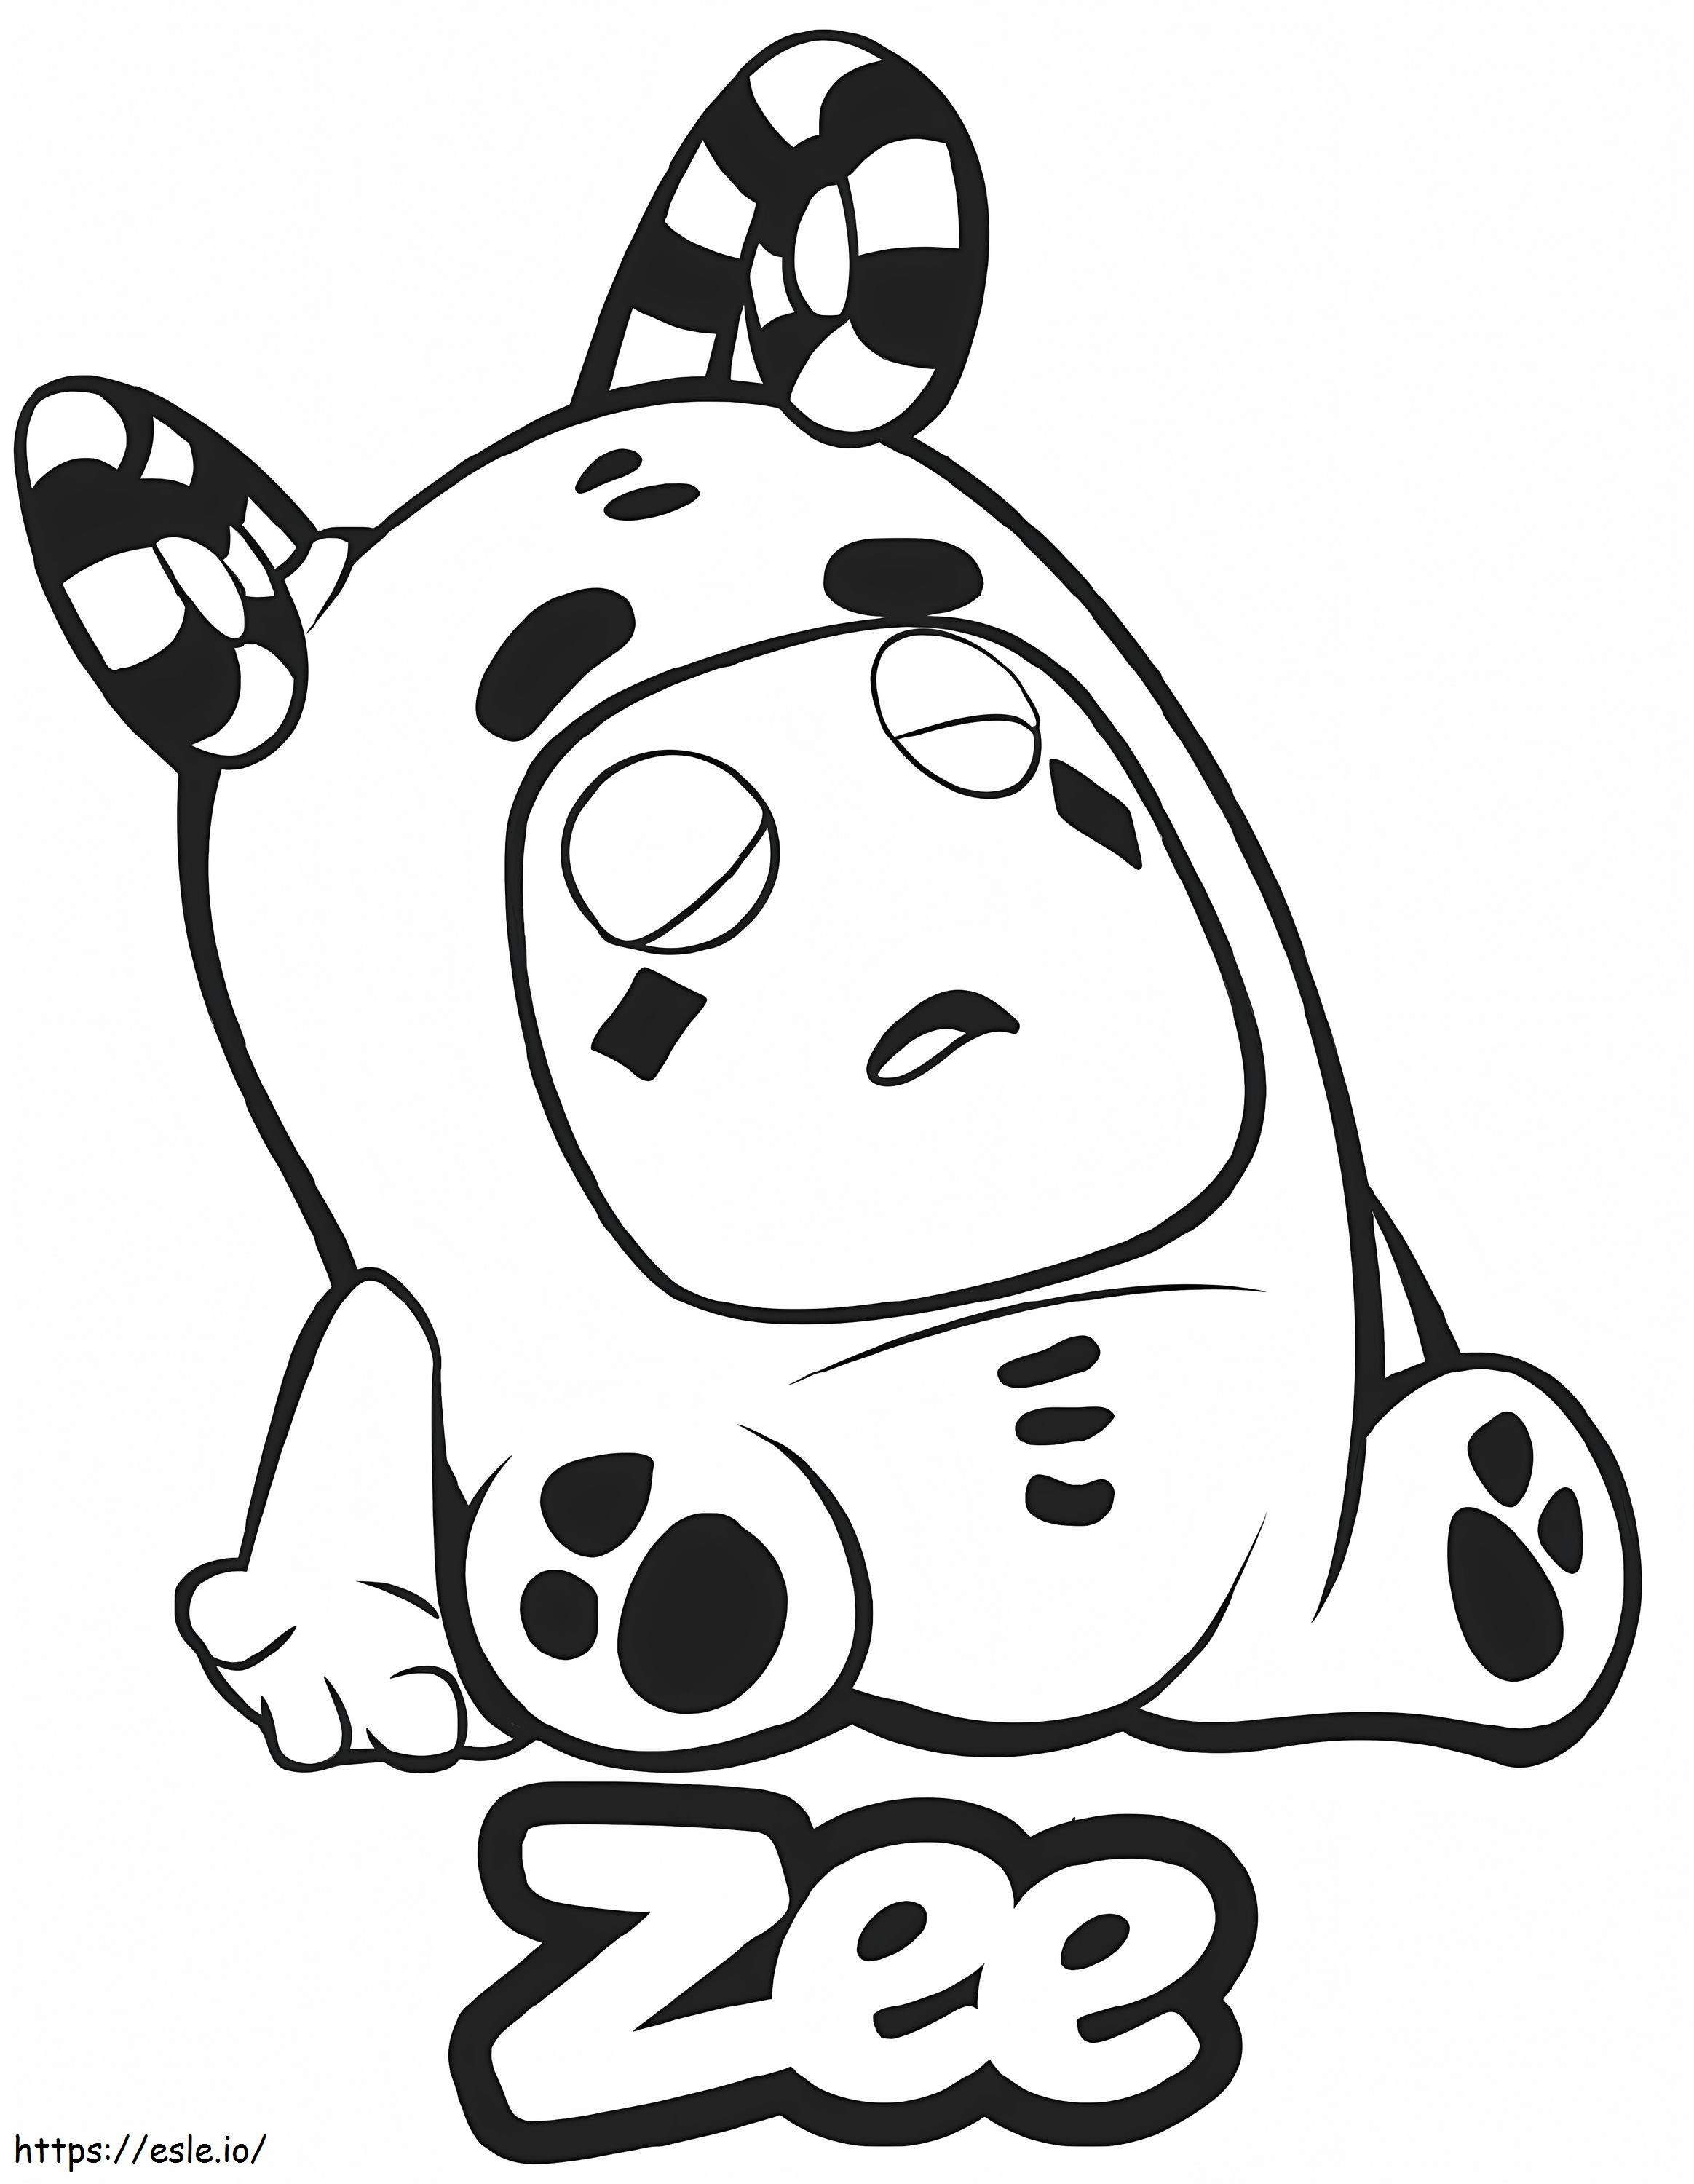 Zee oddbods coloring page